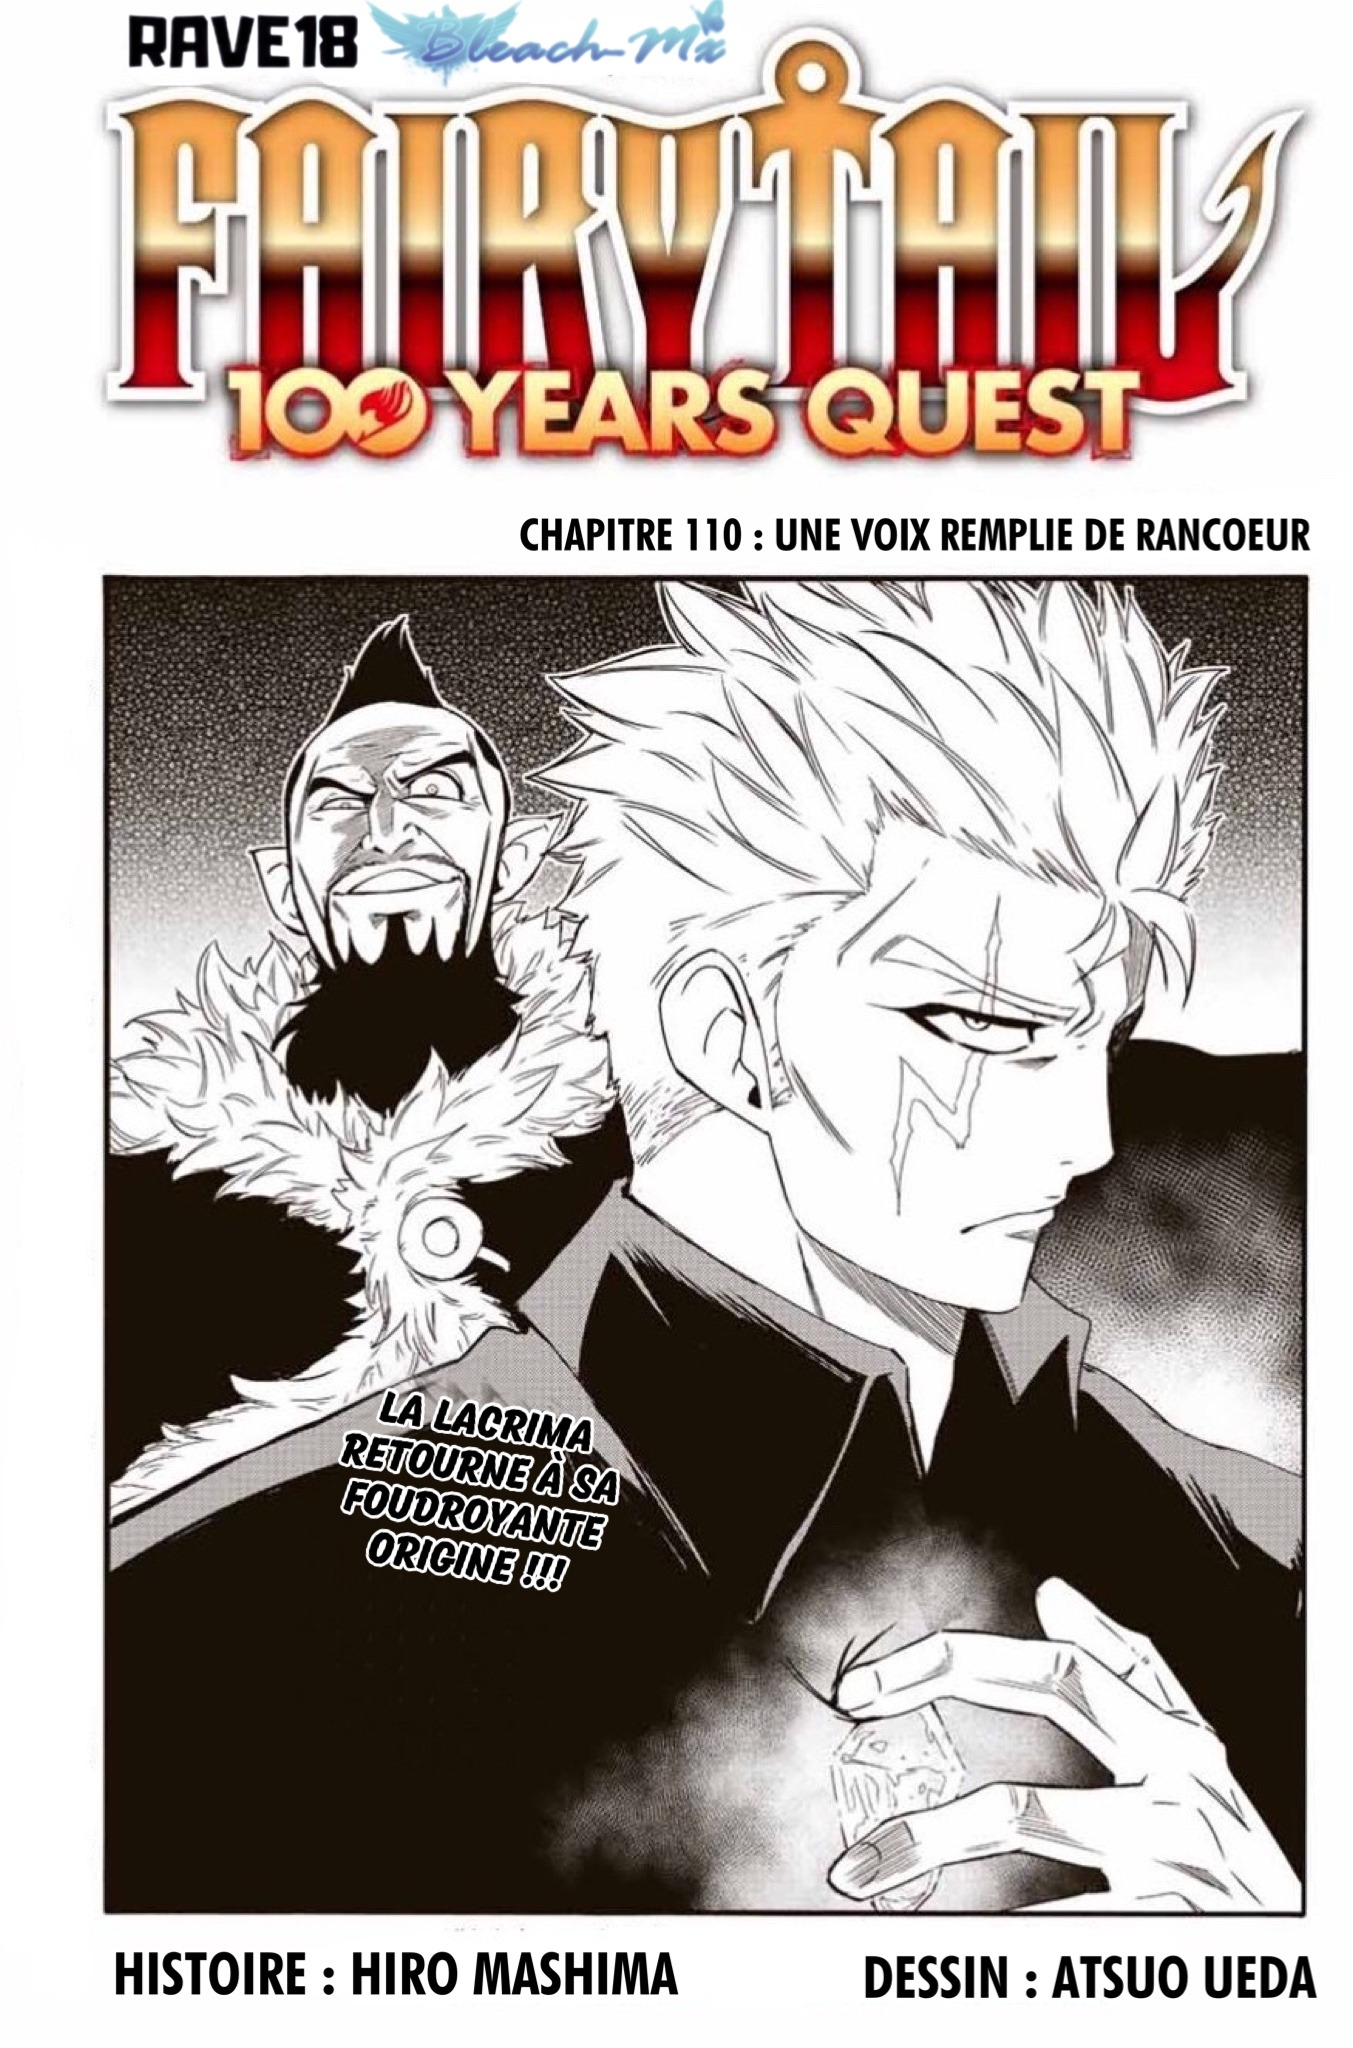 Fairy Tail 100 Years Quest: Chapter 110 - Page 1